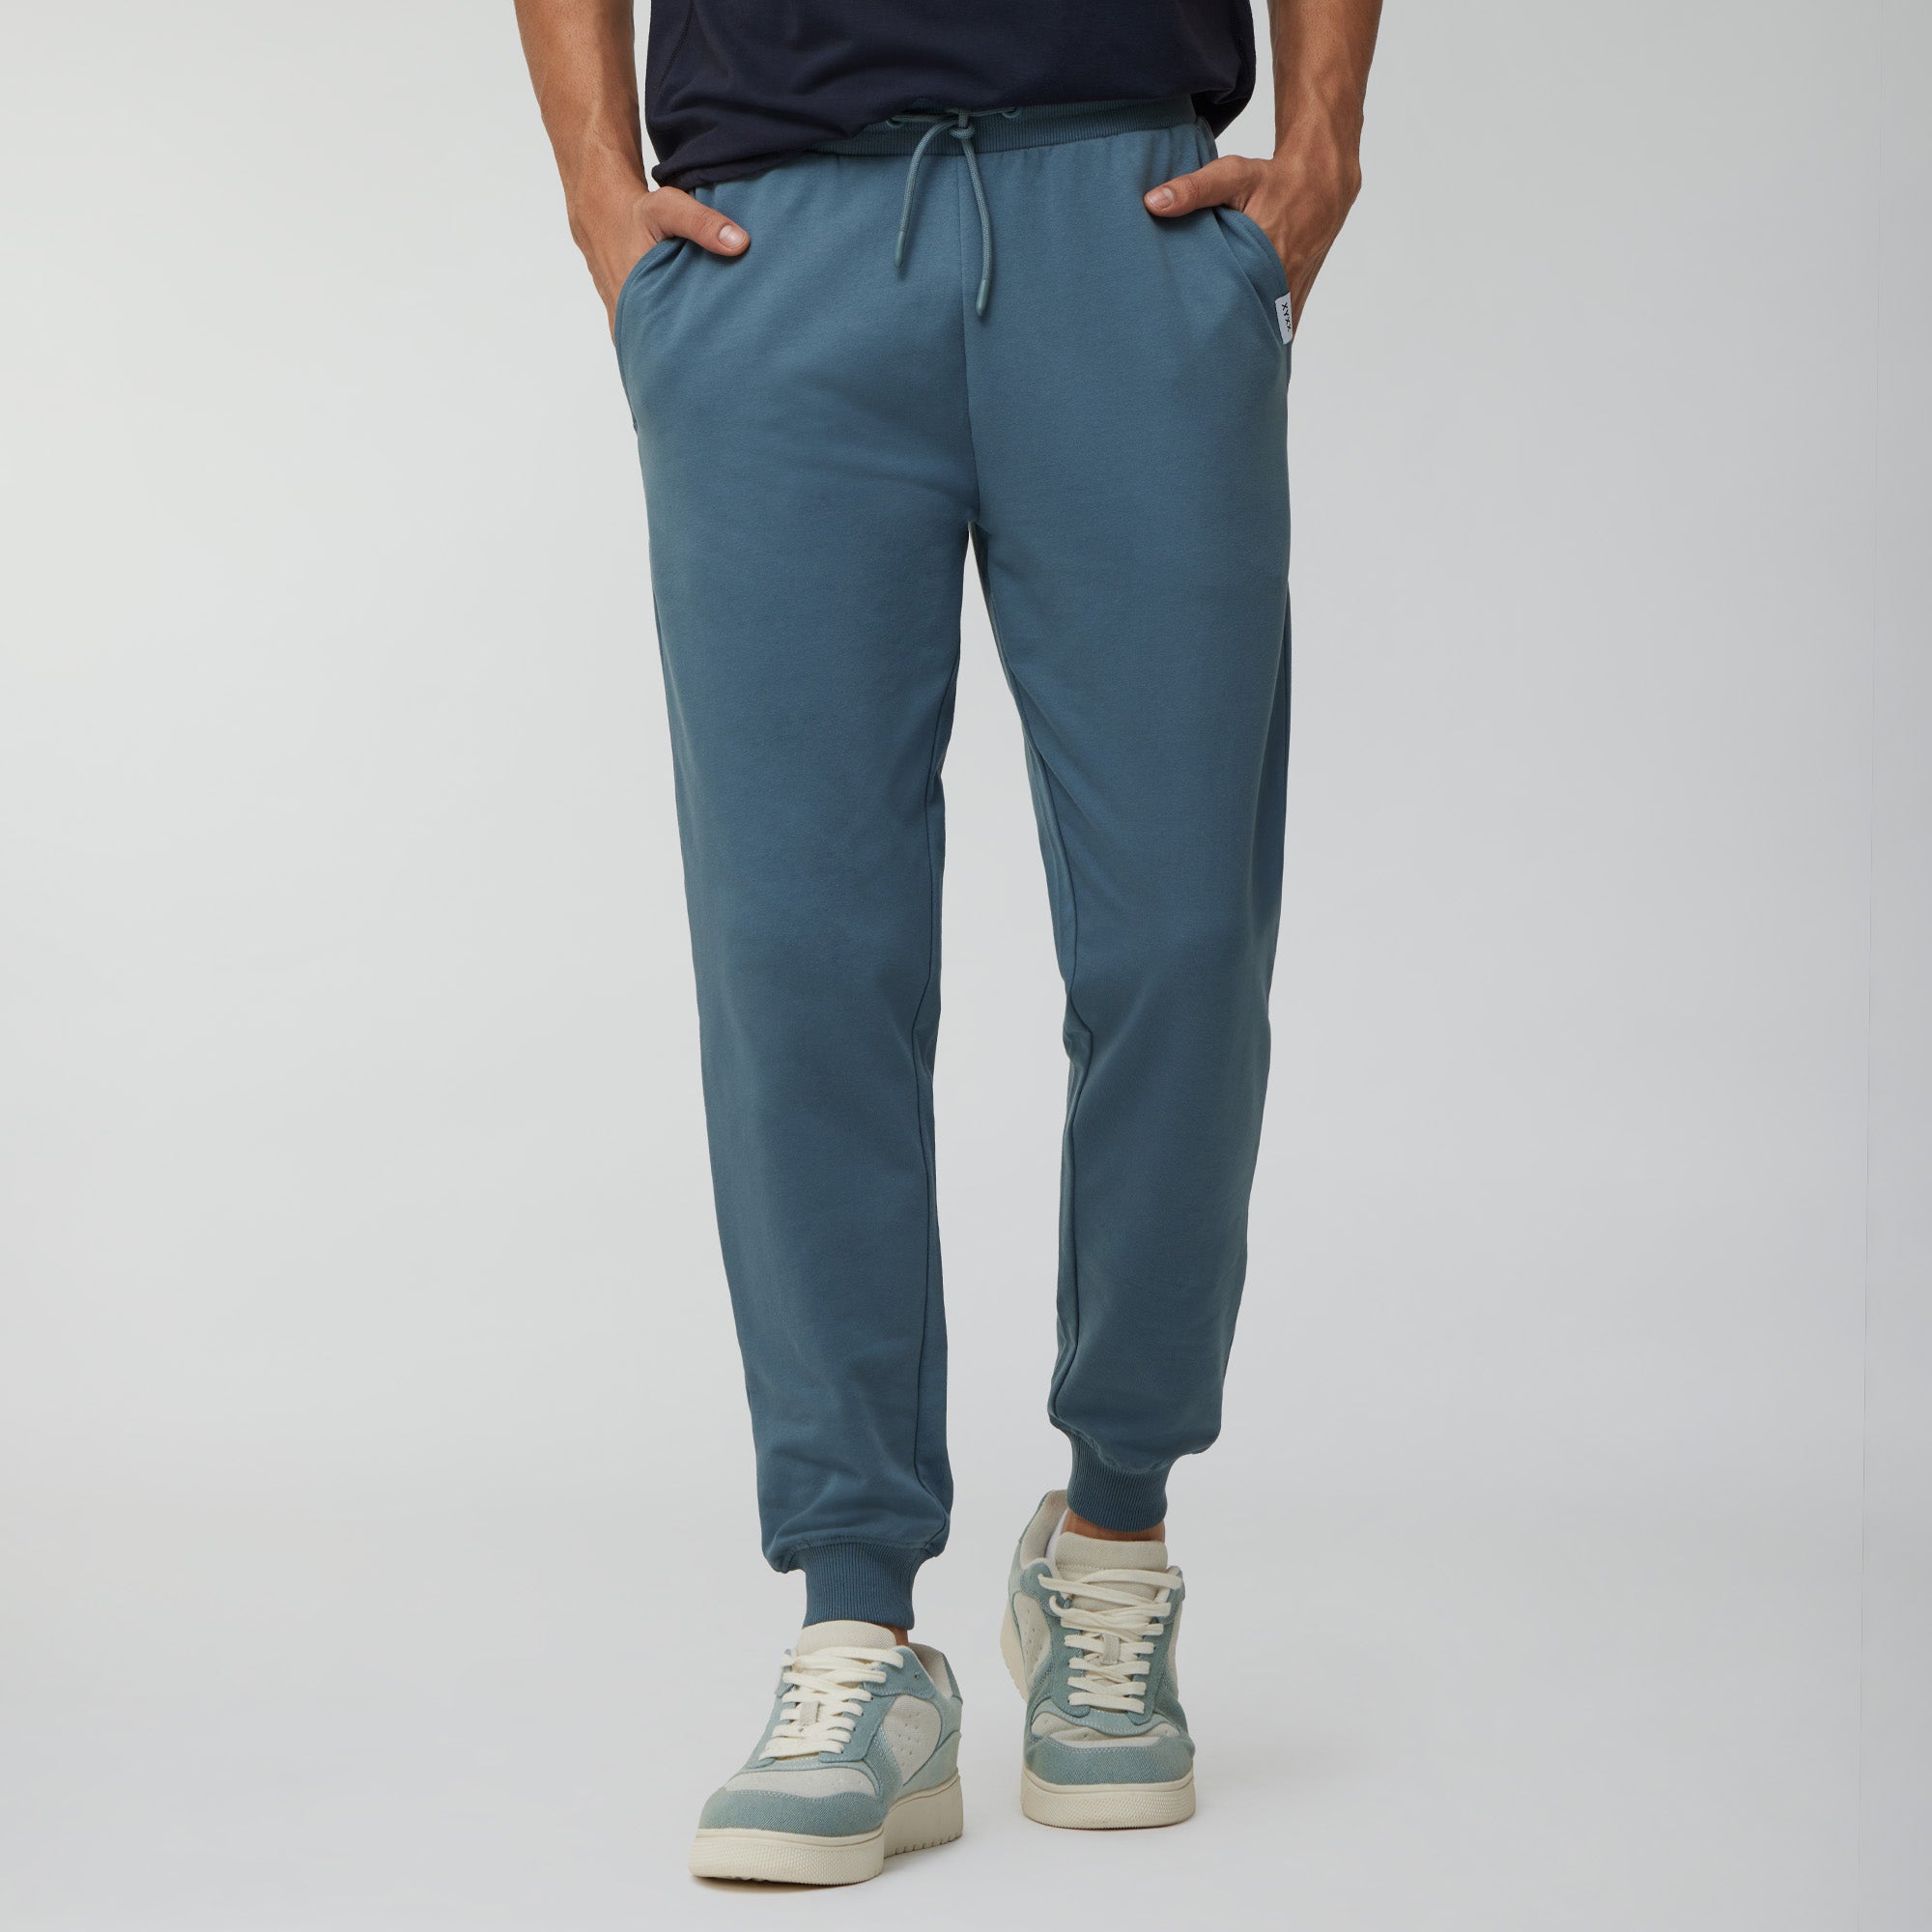 Joggers for Men - Buy Stylish Joggers Track Pants Online in India ...